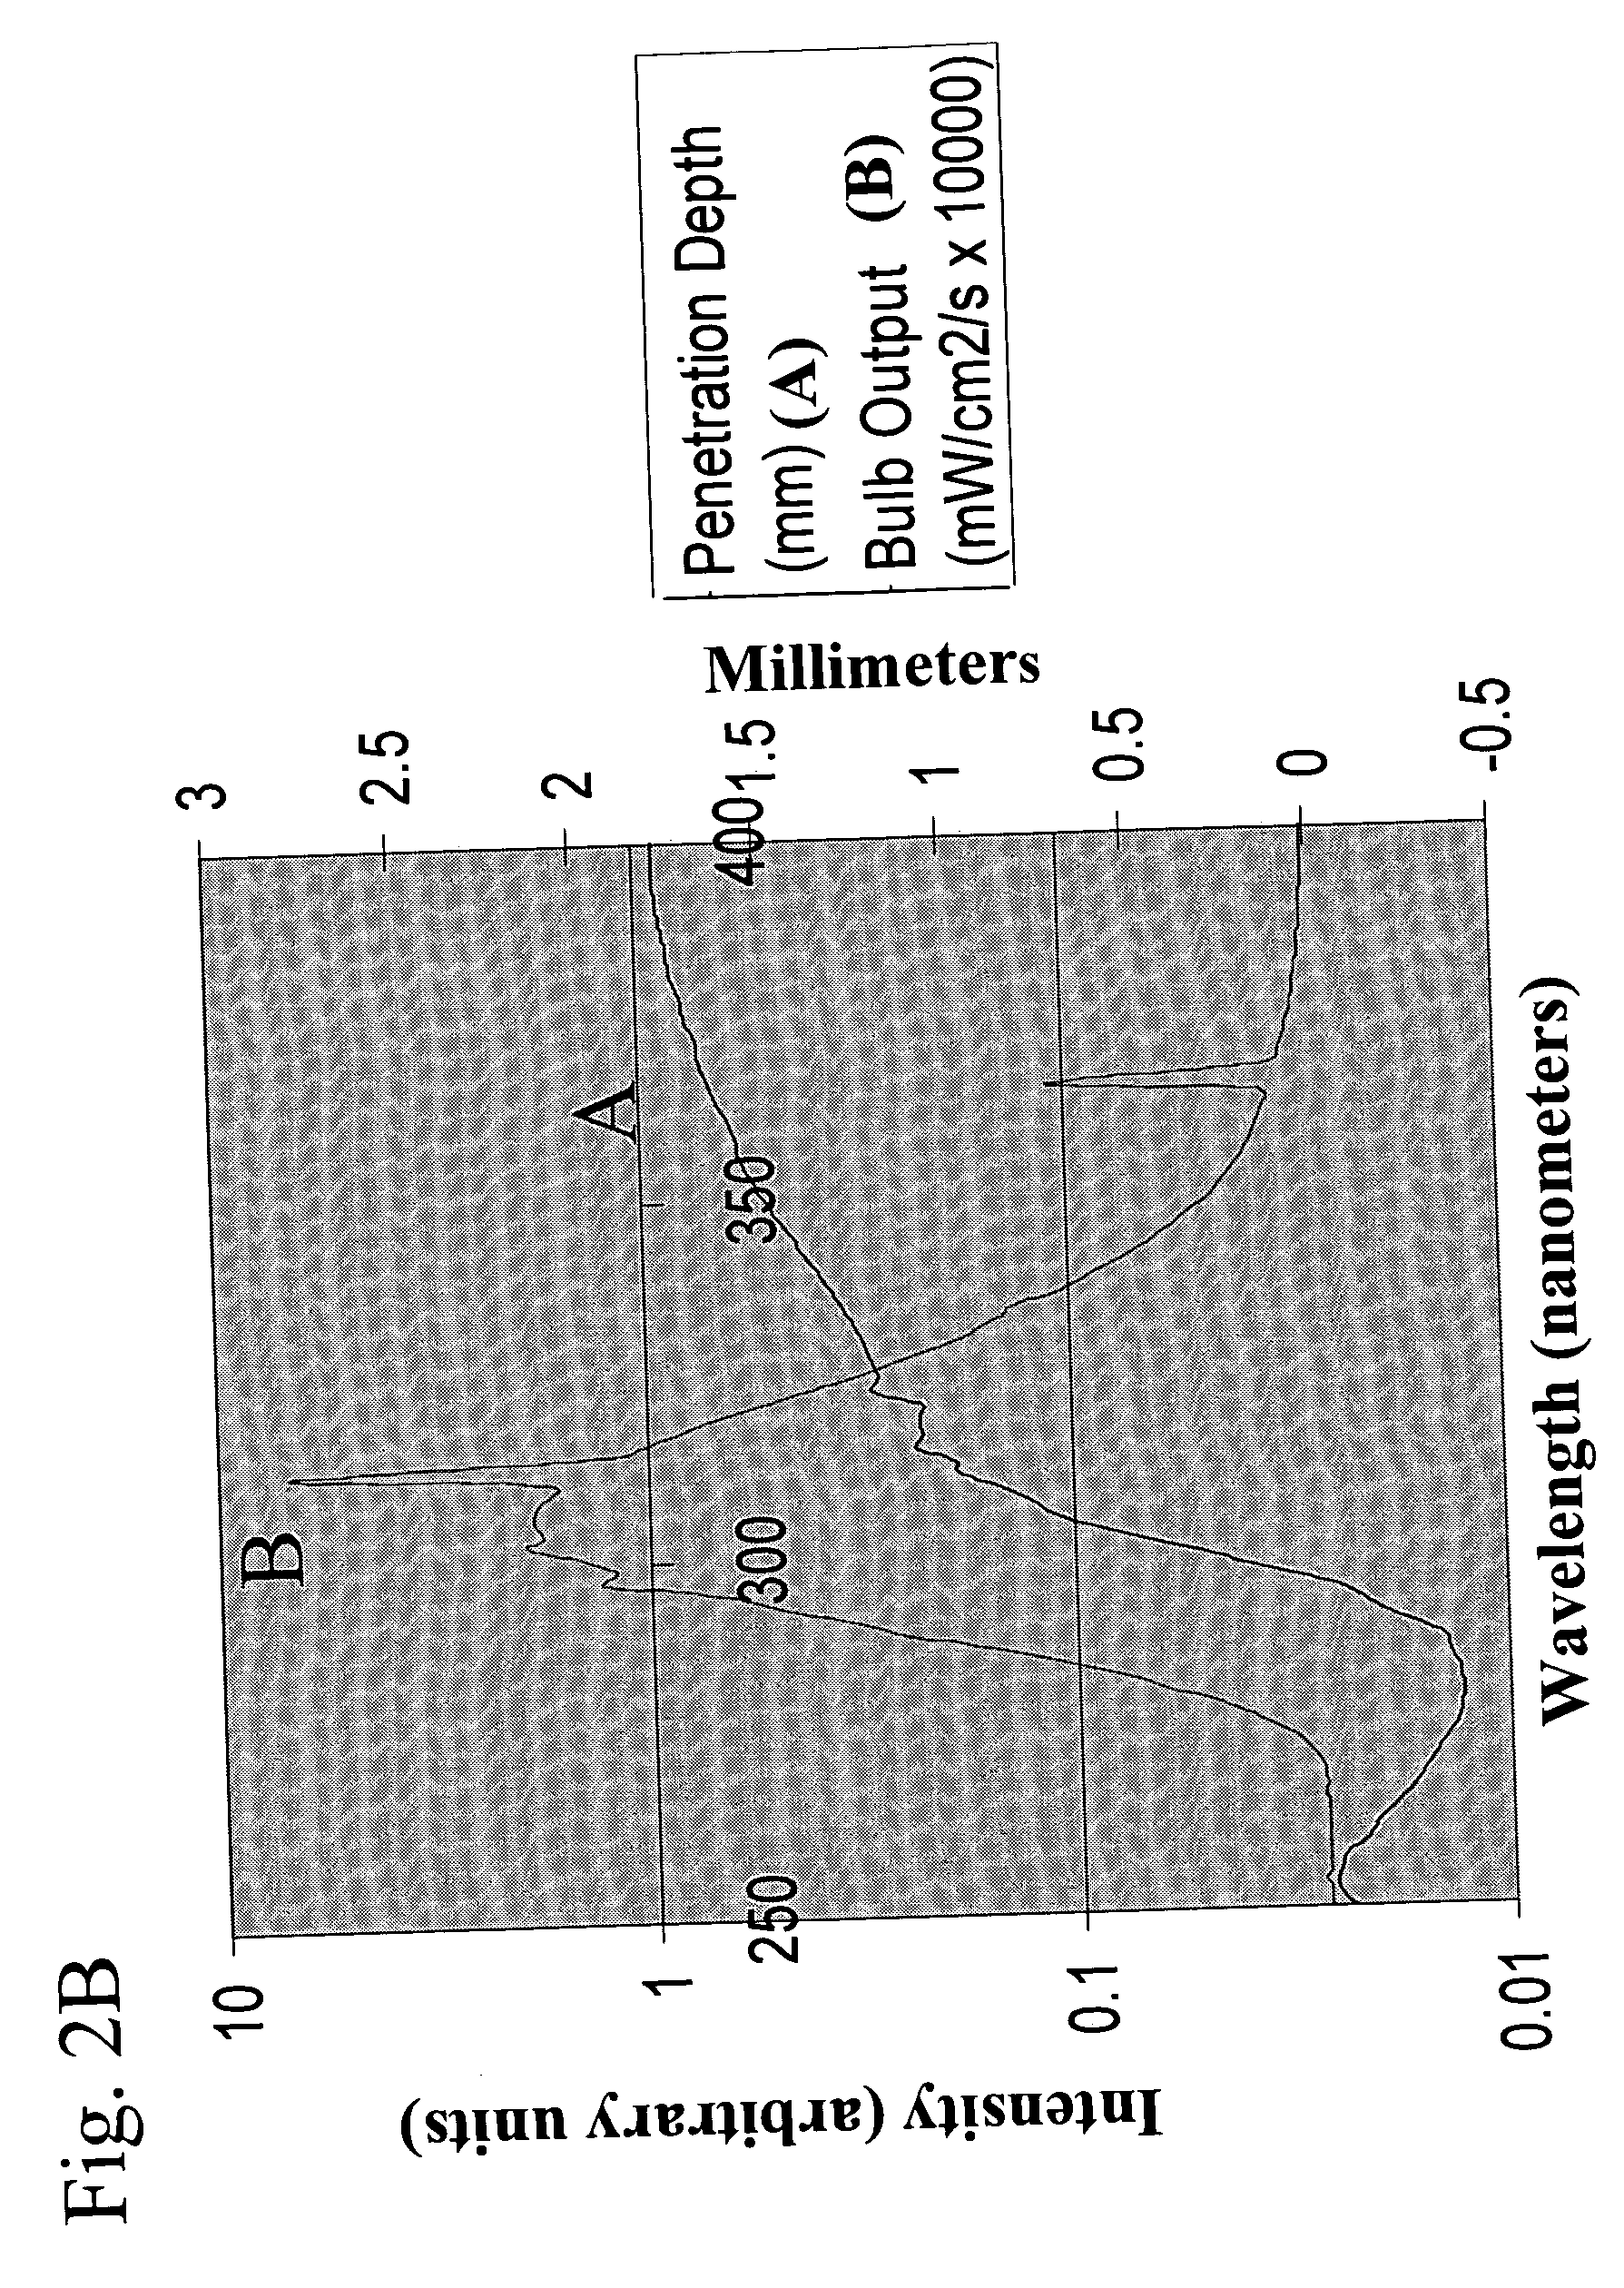 Methods for uniformly treating biological samples with electromagnetic radiation